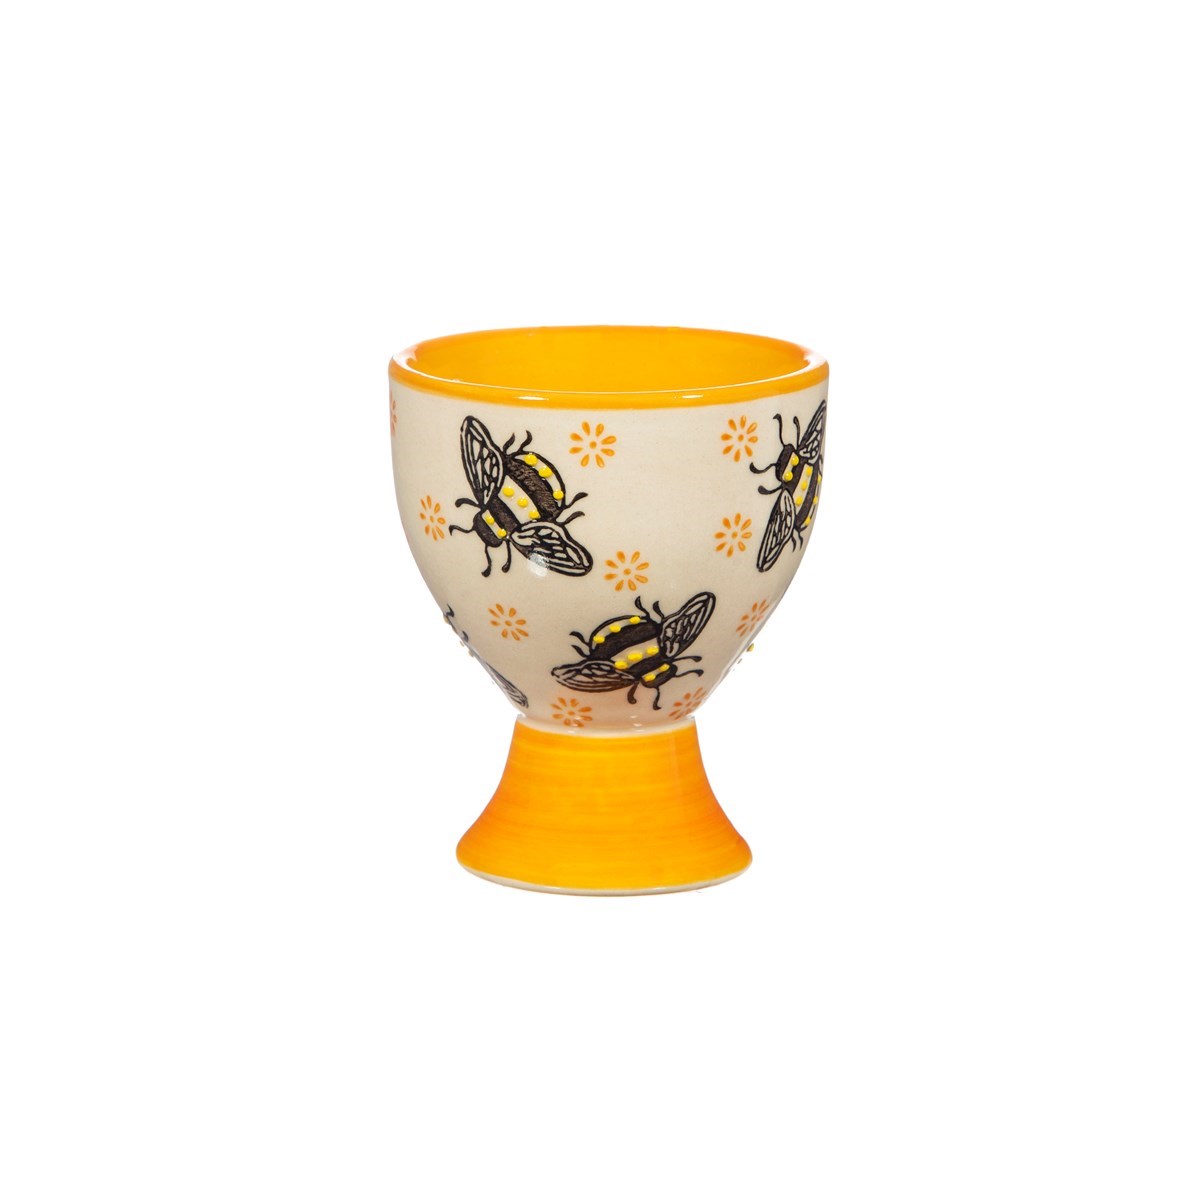 Busy Bee Egg Cup